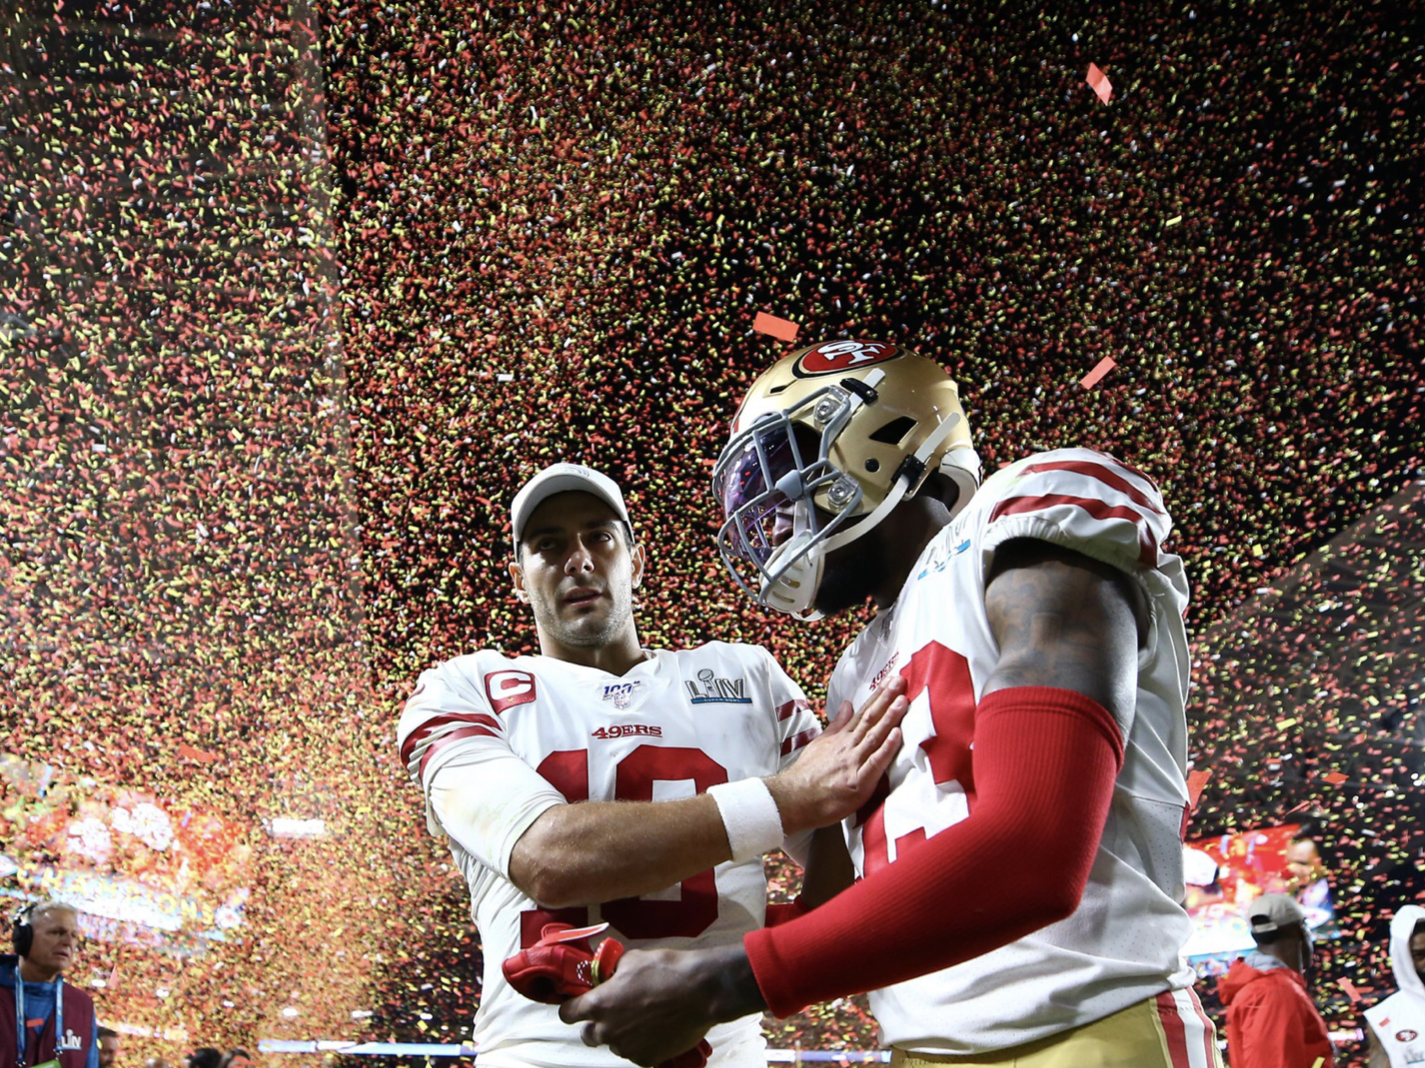 WATCH 49ers throw huge party after Super Bowl loss